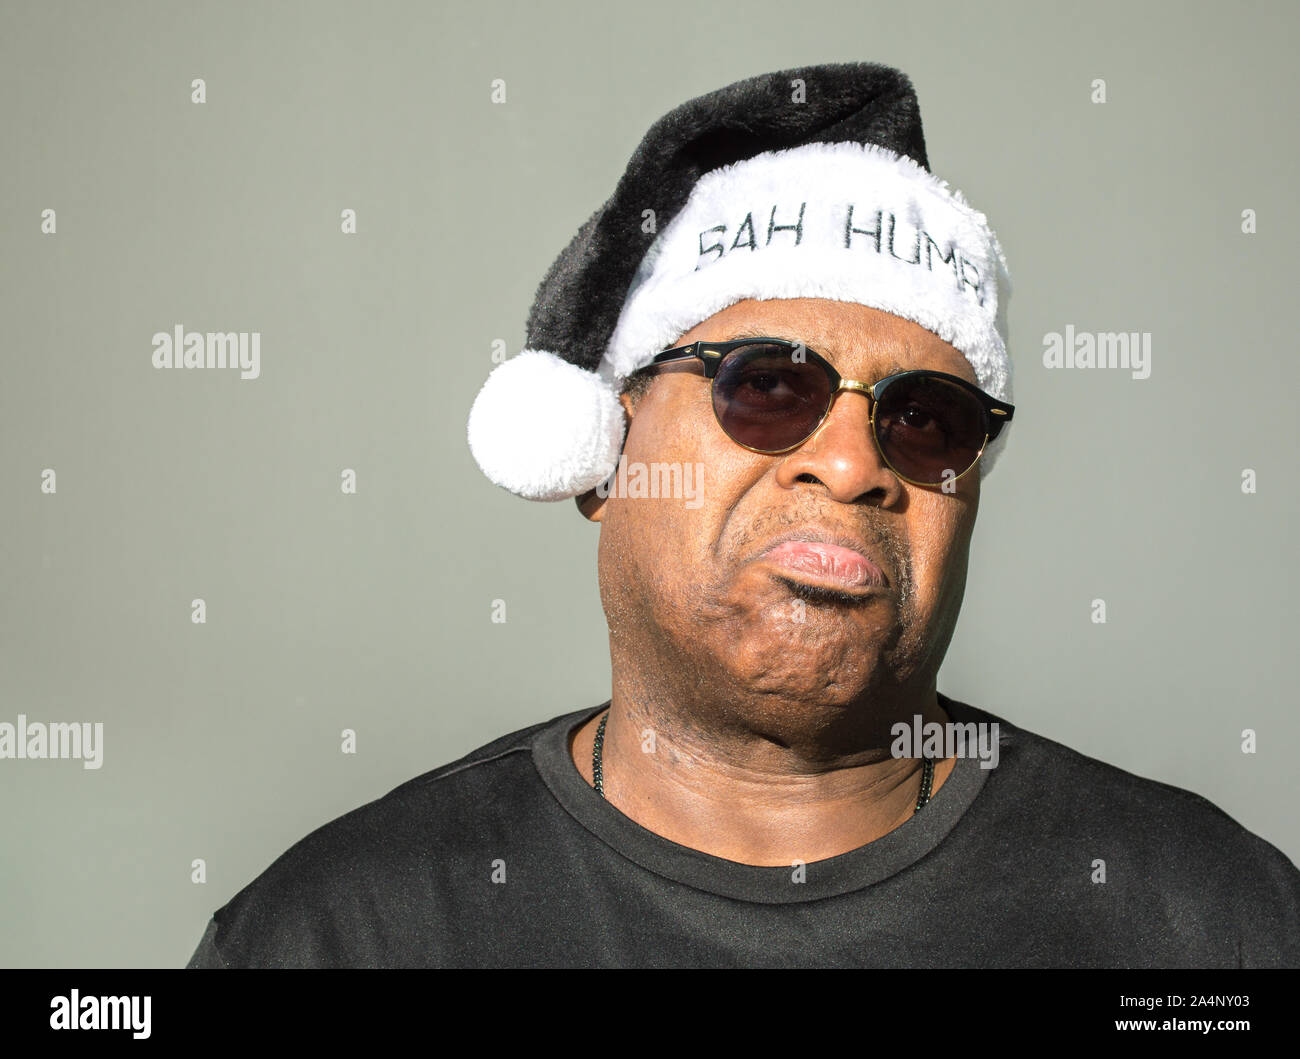 a frowning middle aged African American man wearing a black and white Santa Claus hat saying Bah Humbug on it against a solid background Stock Photo